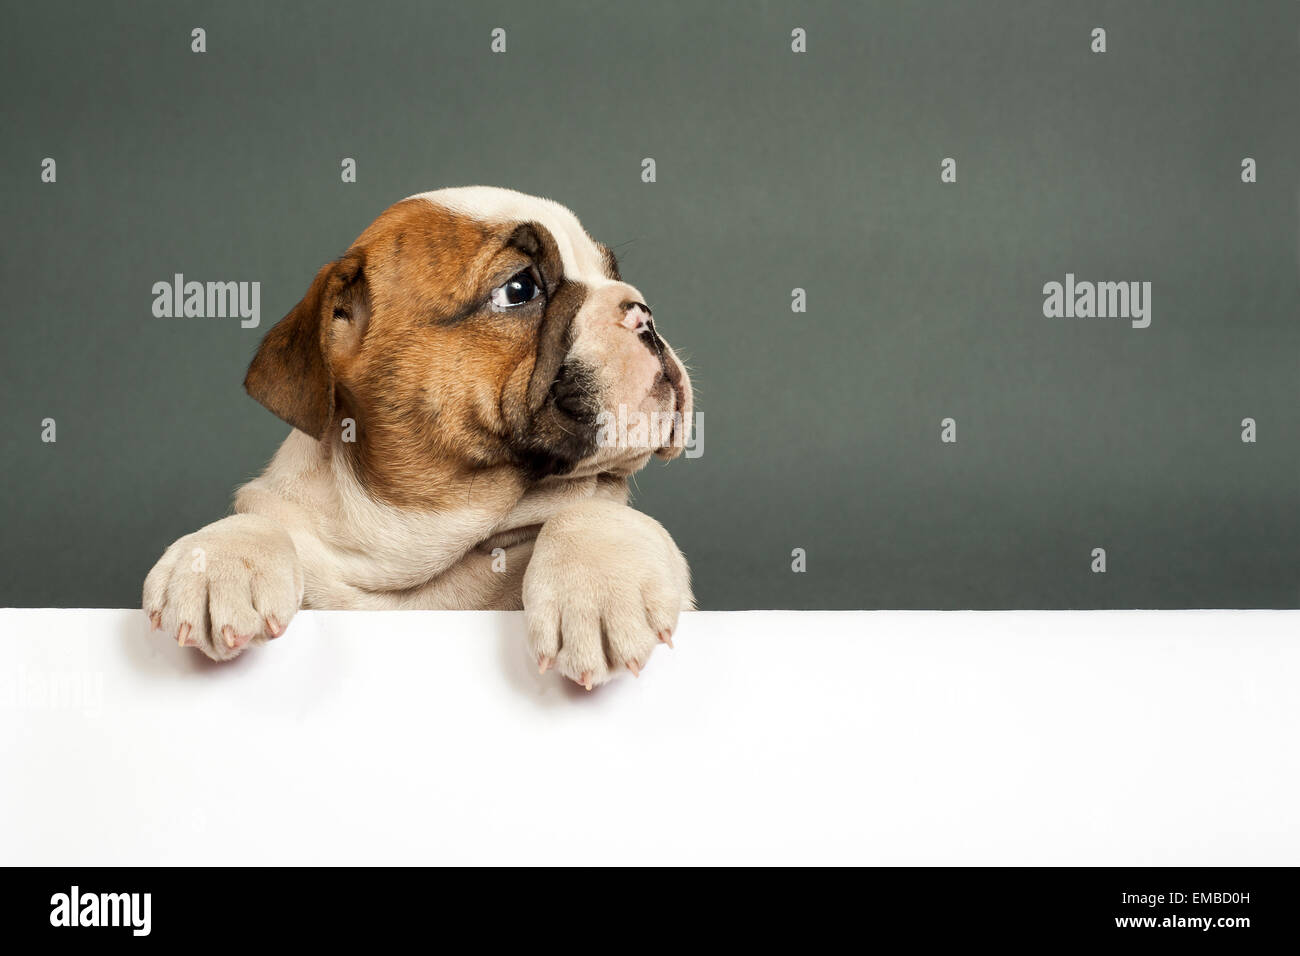 https://c8.alamy.com/comp/EMBD0H/cute-english-bulldog-puppy-with-paws-on-a-message-board-EMBD0H.jpg